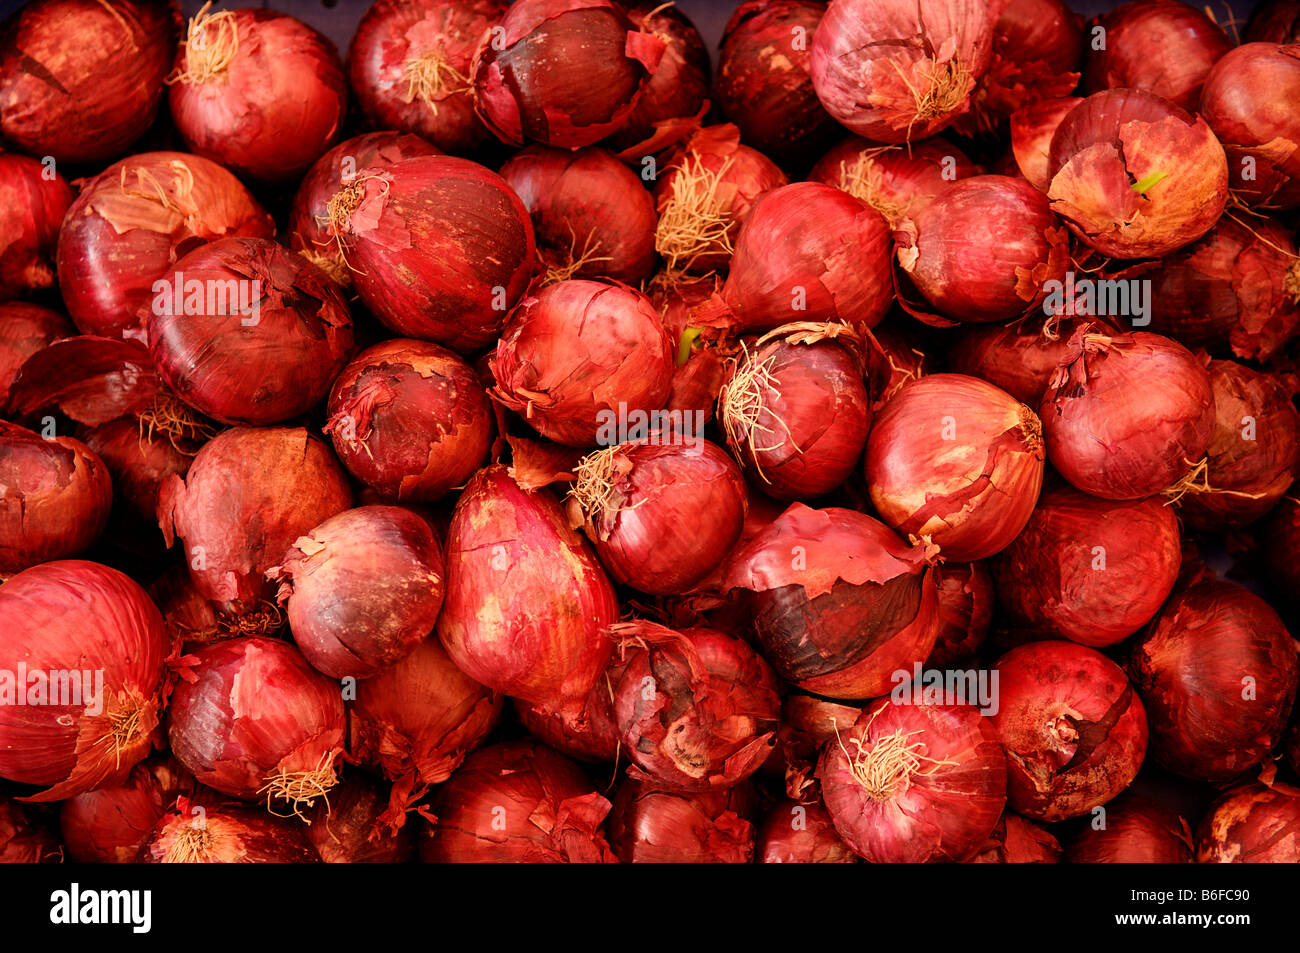 Onions (Allium cepa) for sale at the market in Nuremberg, Bavaria, Germany, Europe Stock Photo